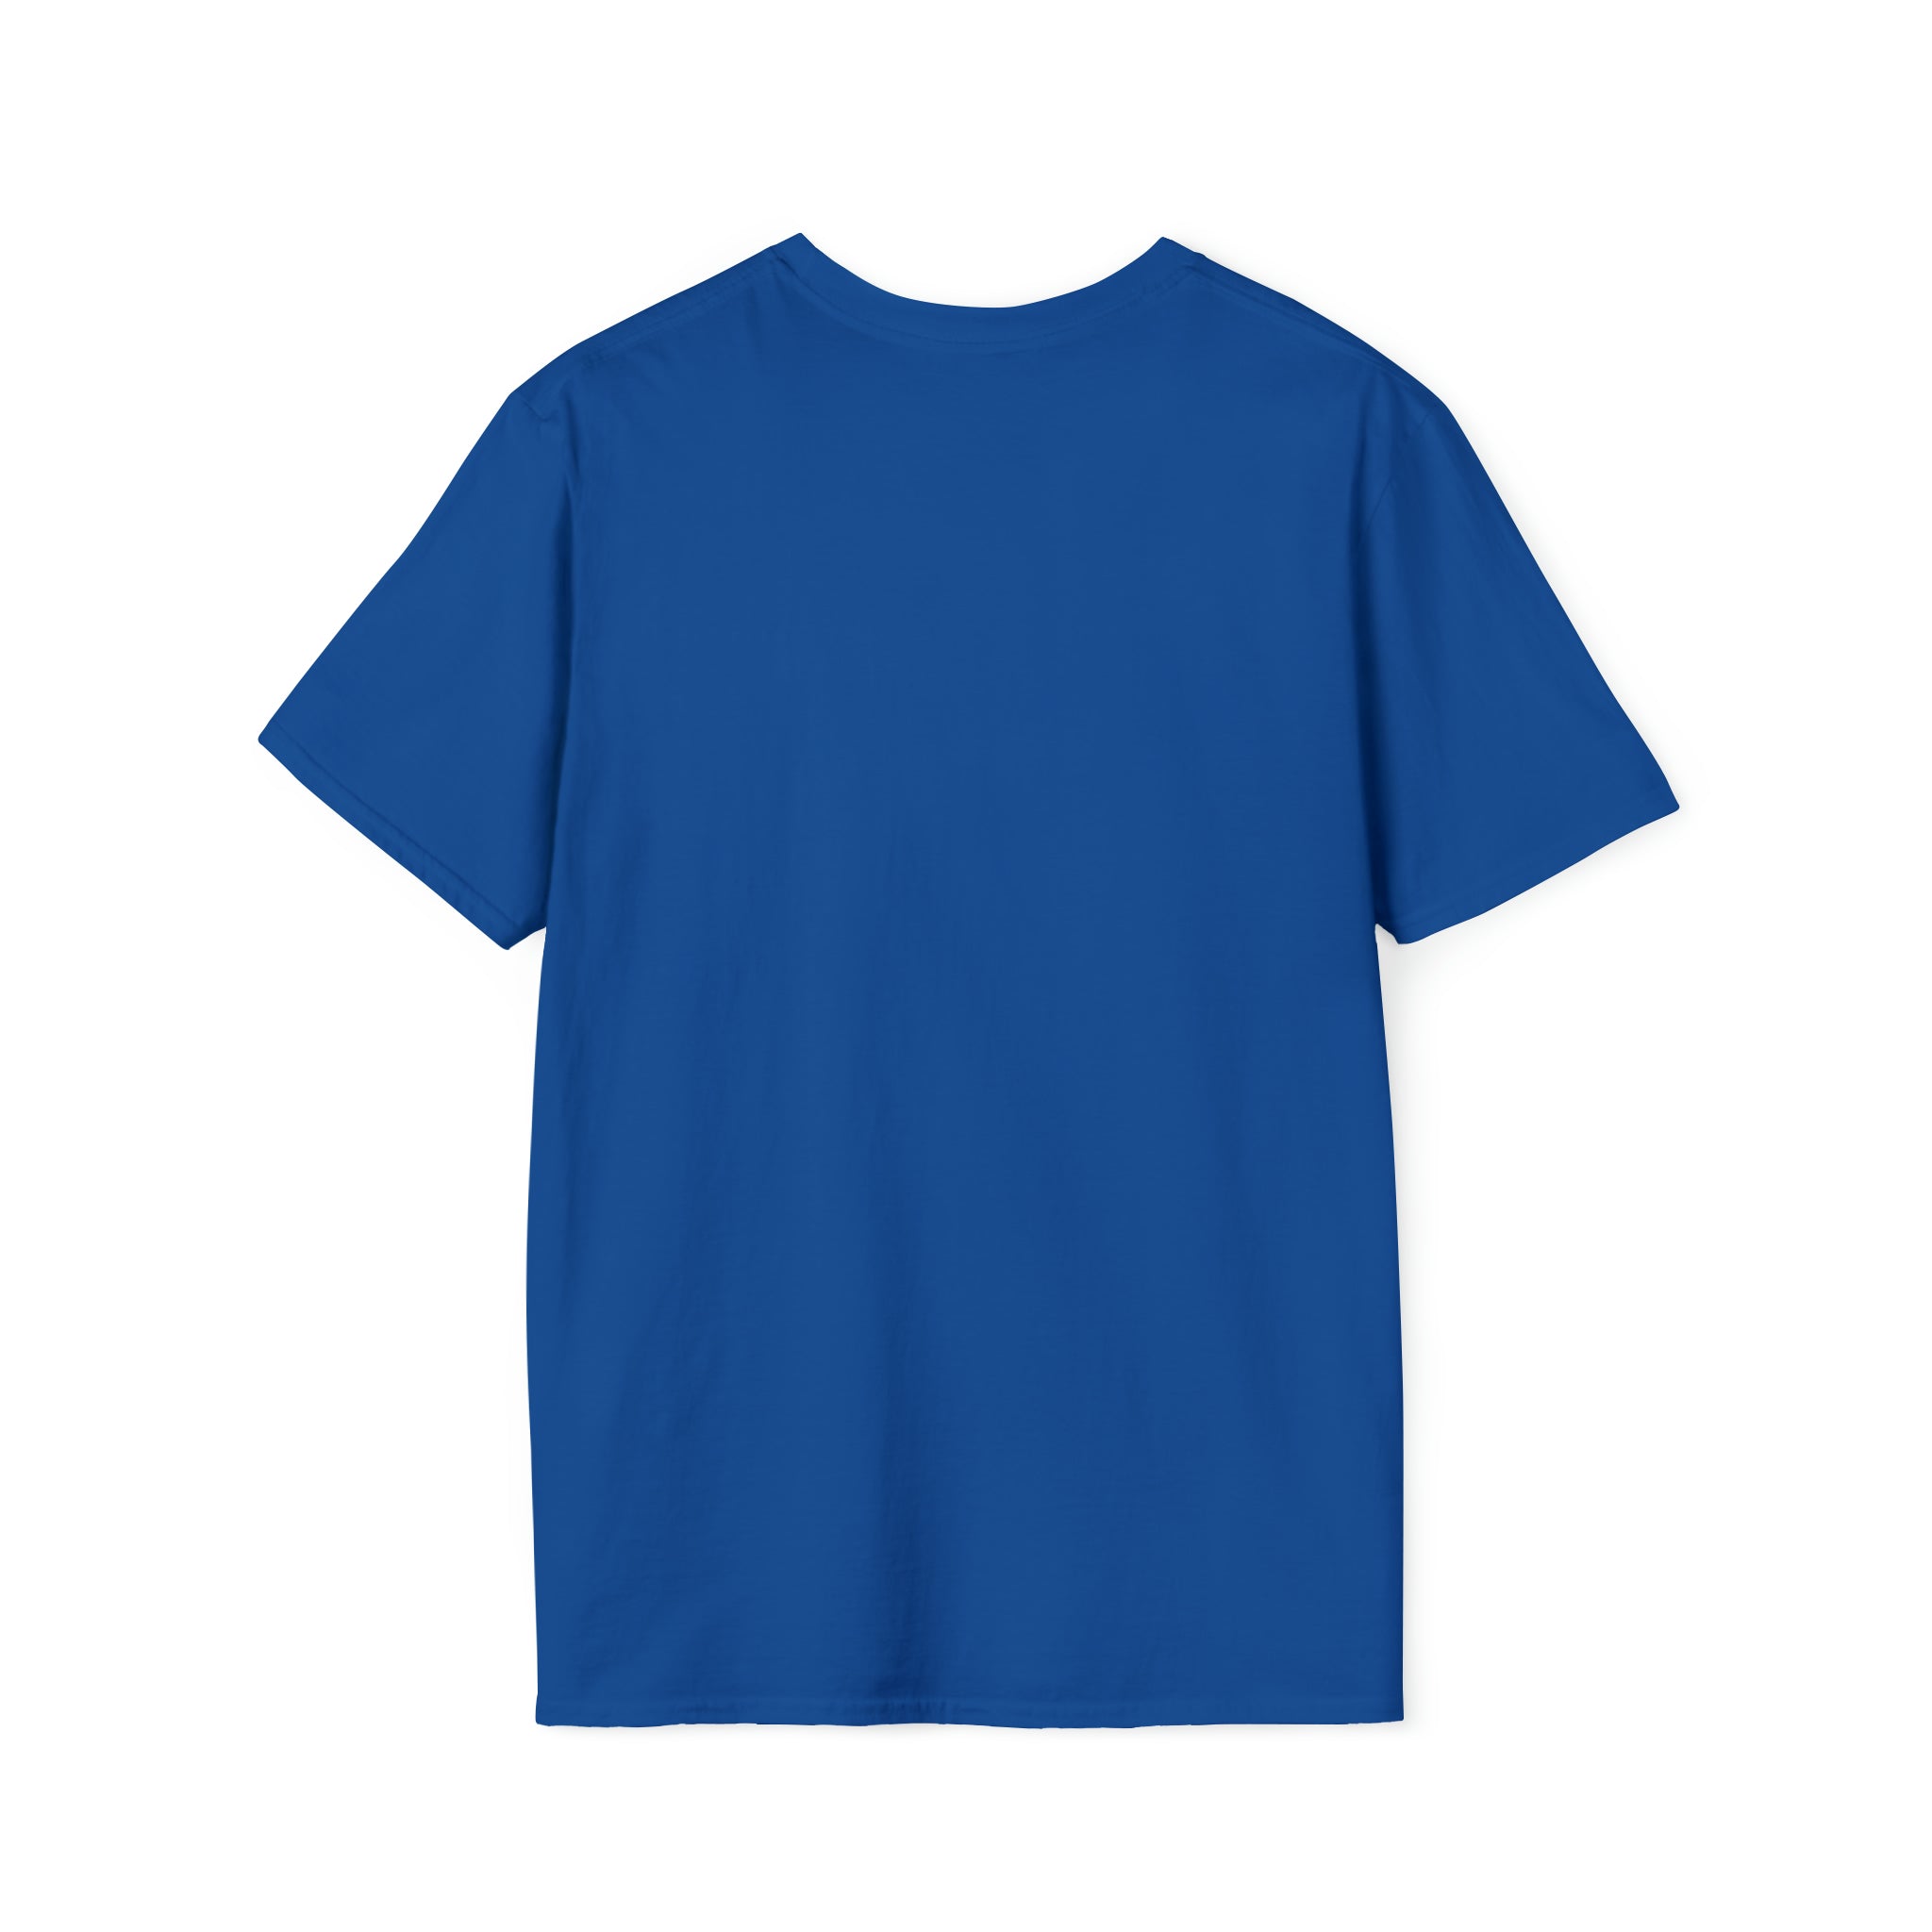 MogMog Planet Unisex Softstyle T-Shirt (Real ver.) [BLUE]